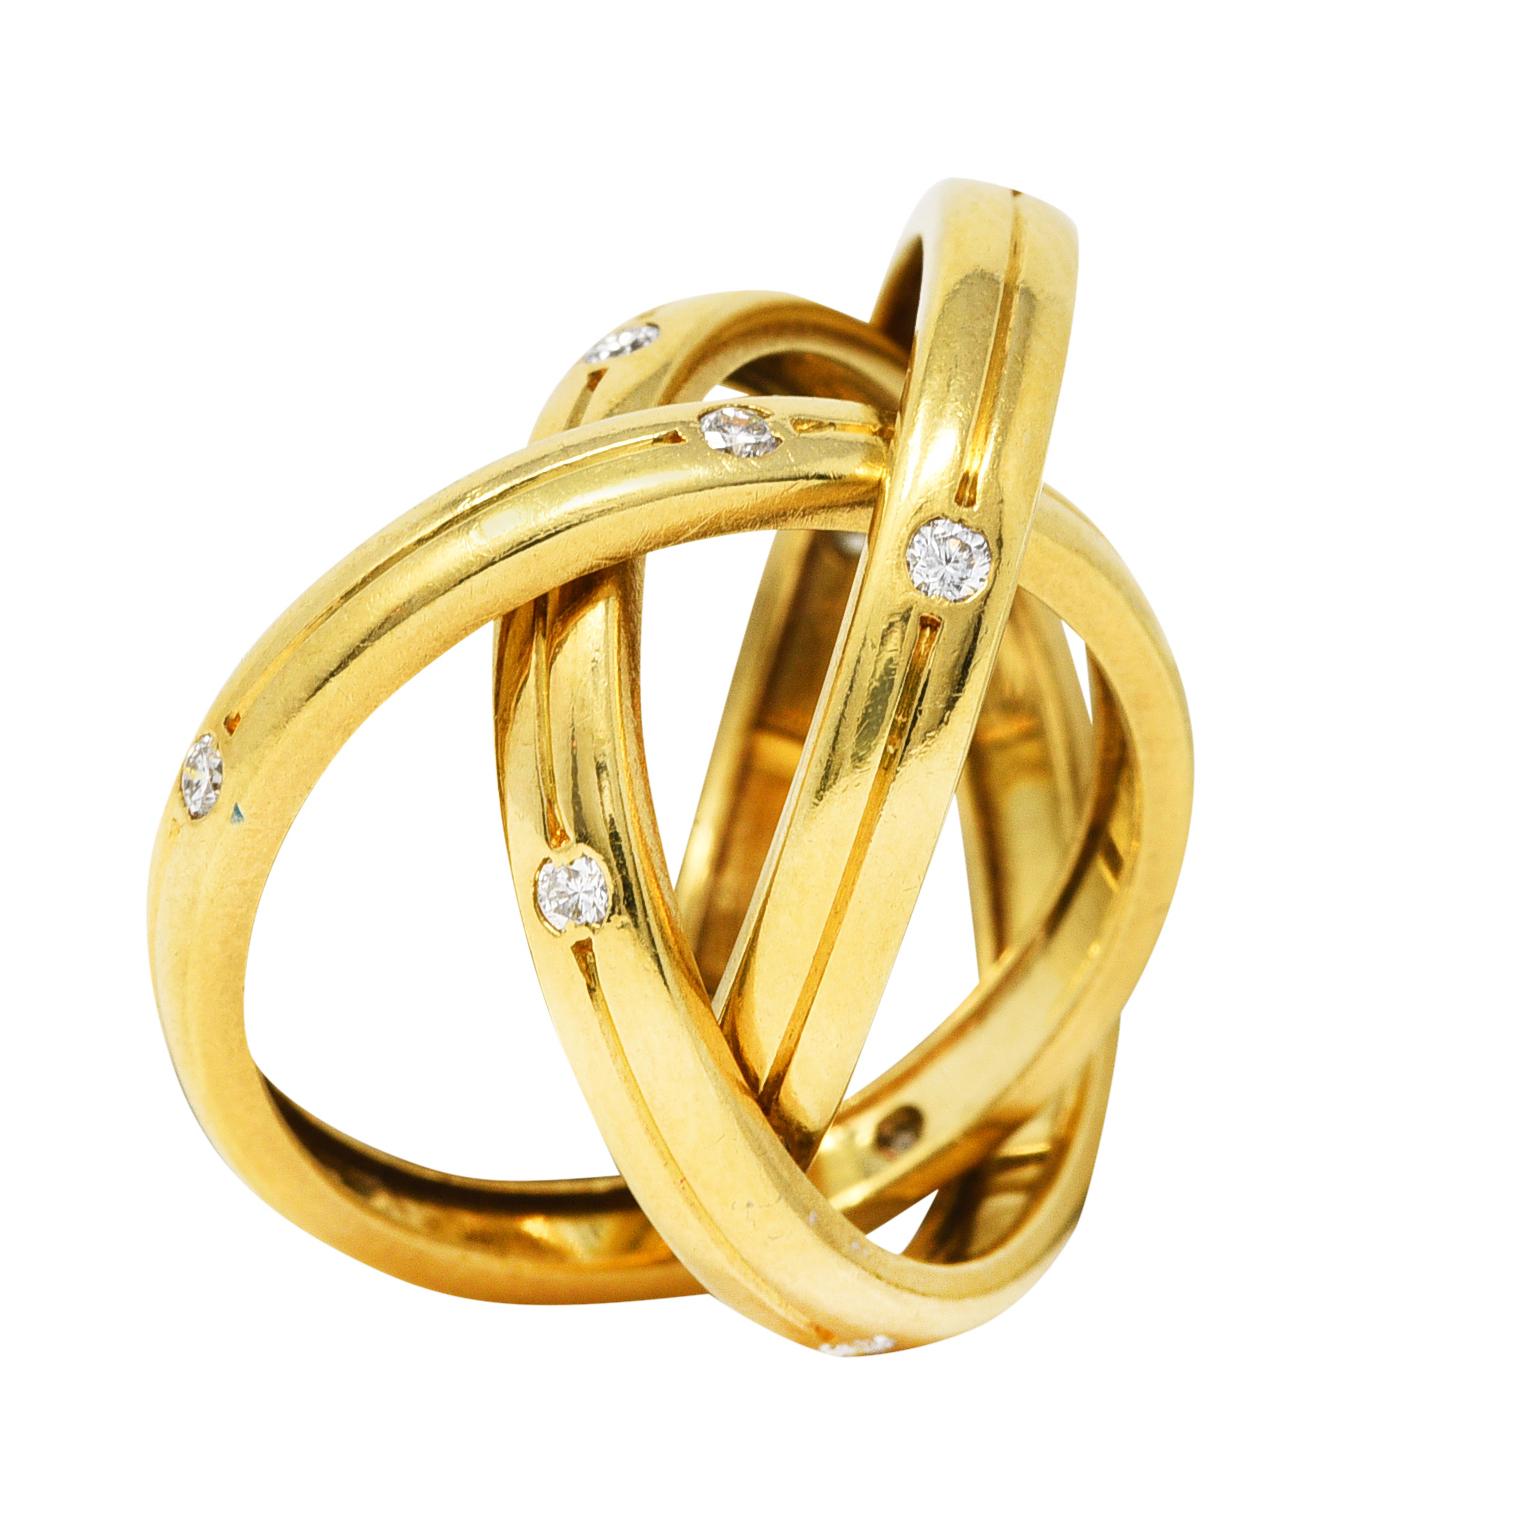 Designed as three grooved and intersecting gold band rings with a high polished finish

Accented by fifteen round brilliant cut diamonds weighing approximately 0.30 carat in total

Fully signed Cartier and stamped 18k for 18 karat gold

Ring Size: 4